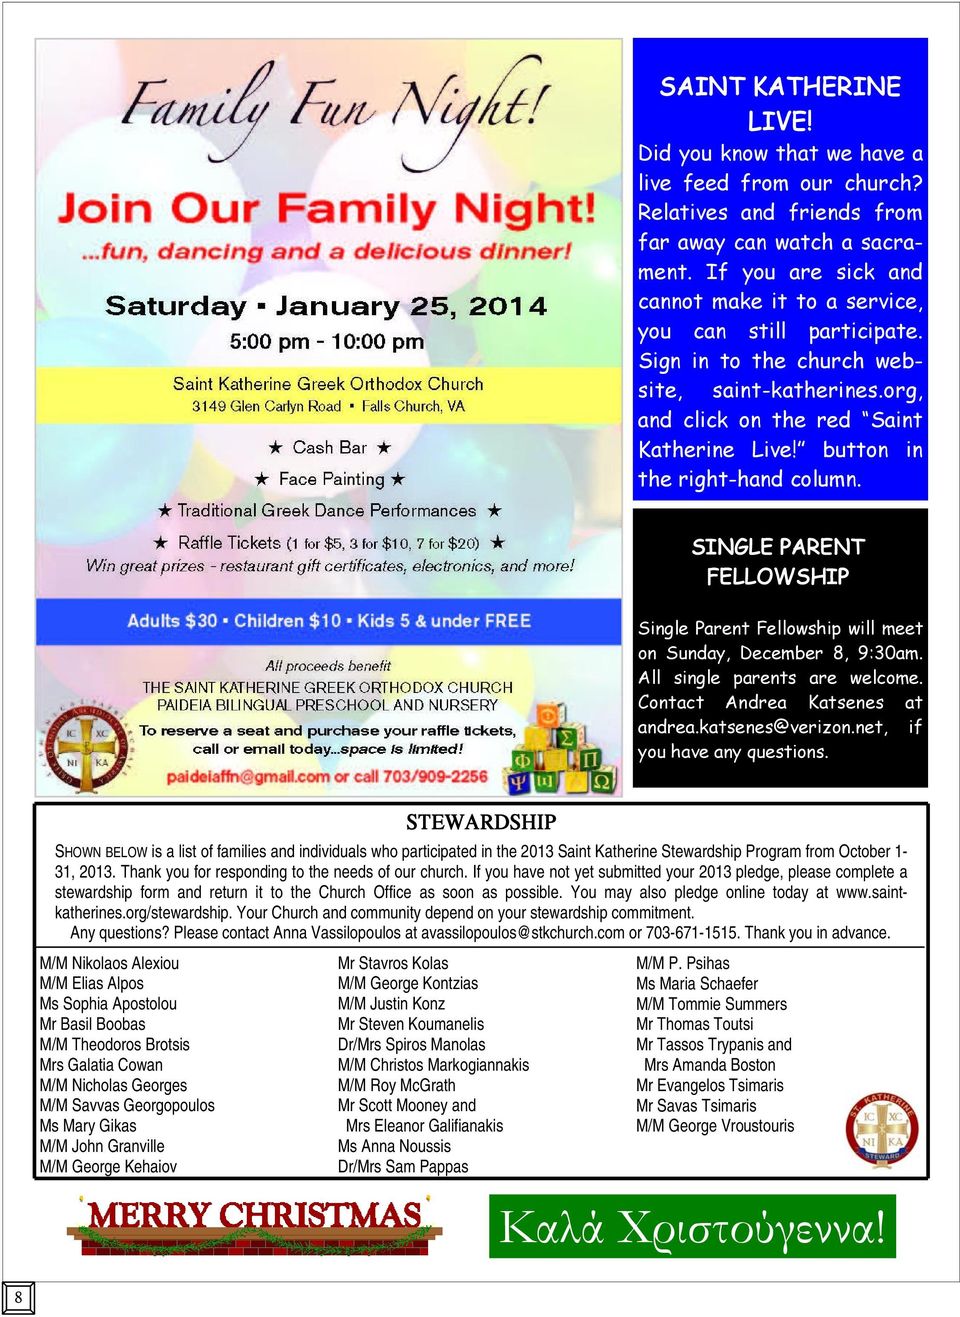 button in the right-hand column. SINGLE PARENT FELLOWSHIP Single Parent Fellowship will meet on Sunday, December 8, 9:30am. All single parents are welcome. Contact Andrea Katsenes at andrea.